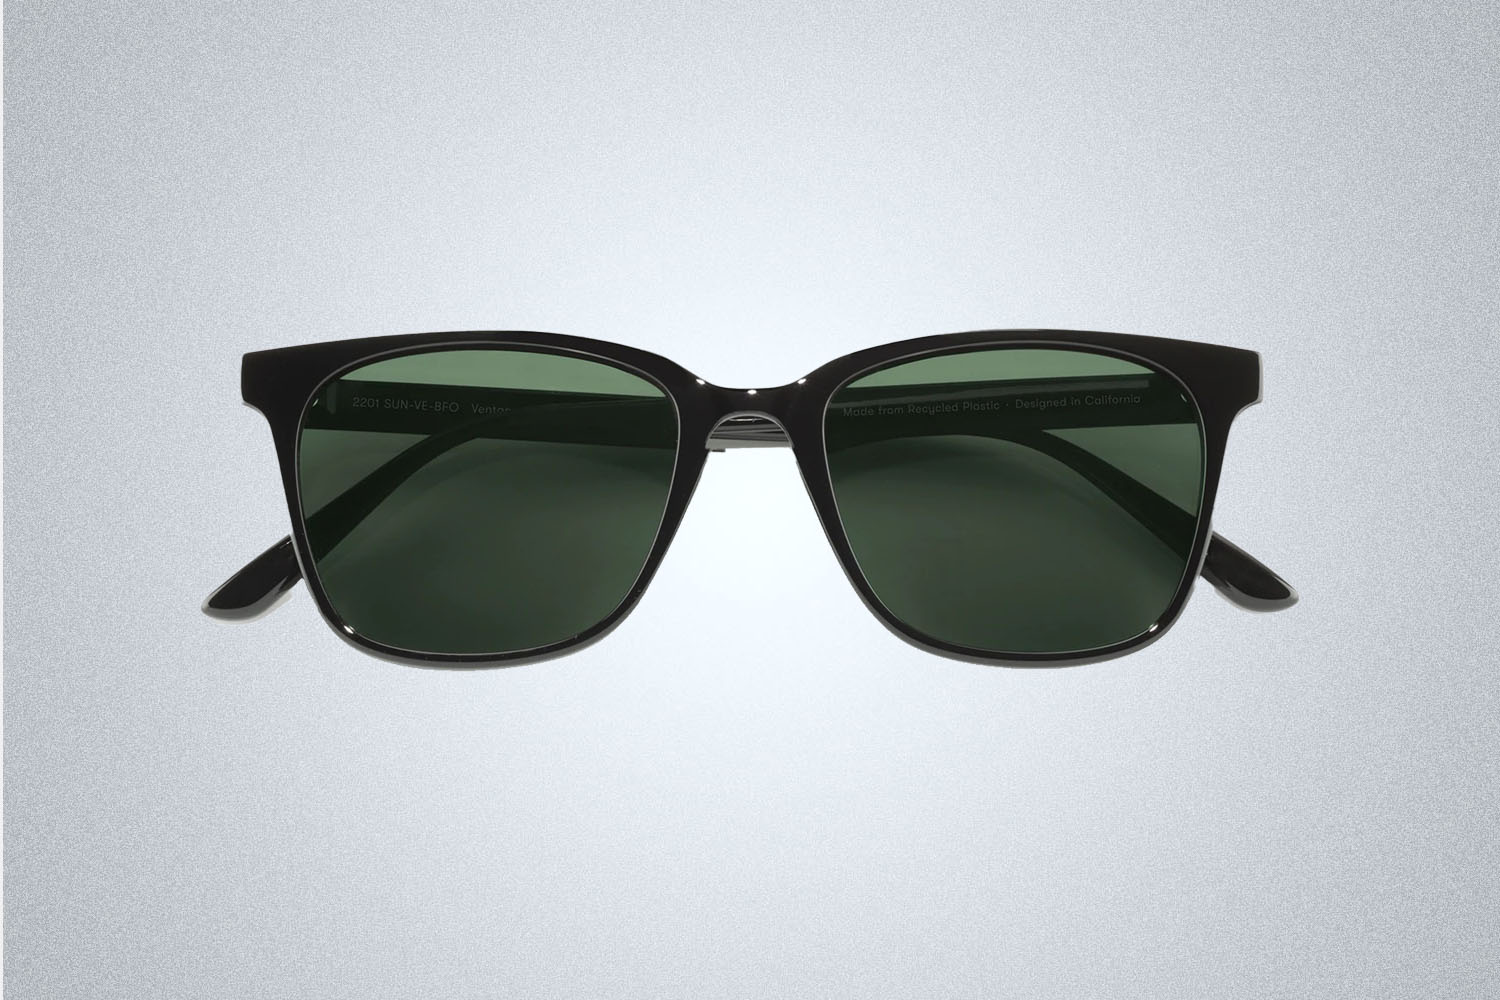 A pair of square black sunglasses from Sunski on a grey background